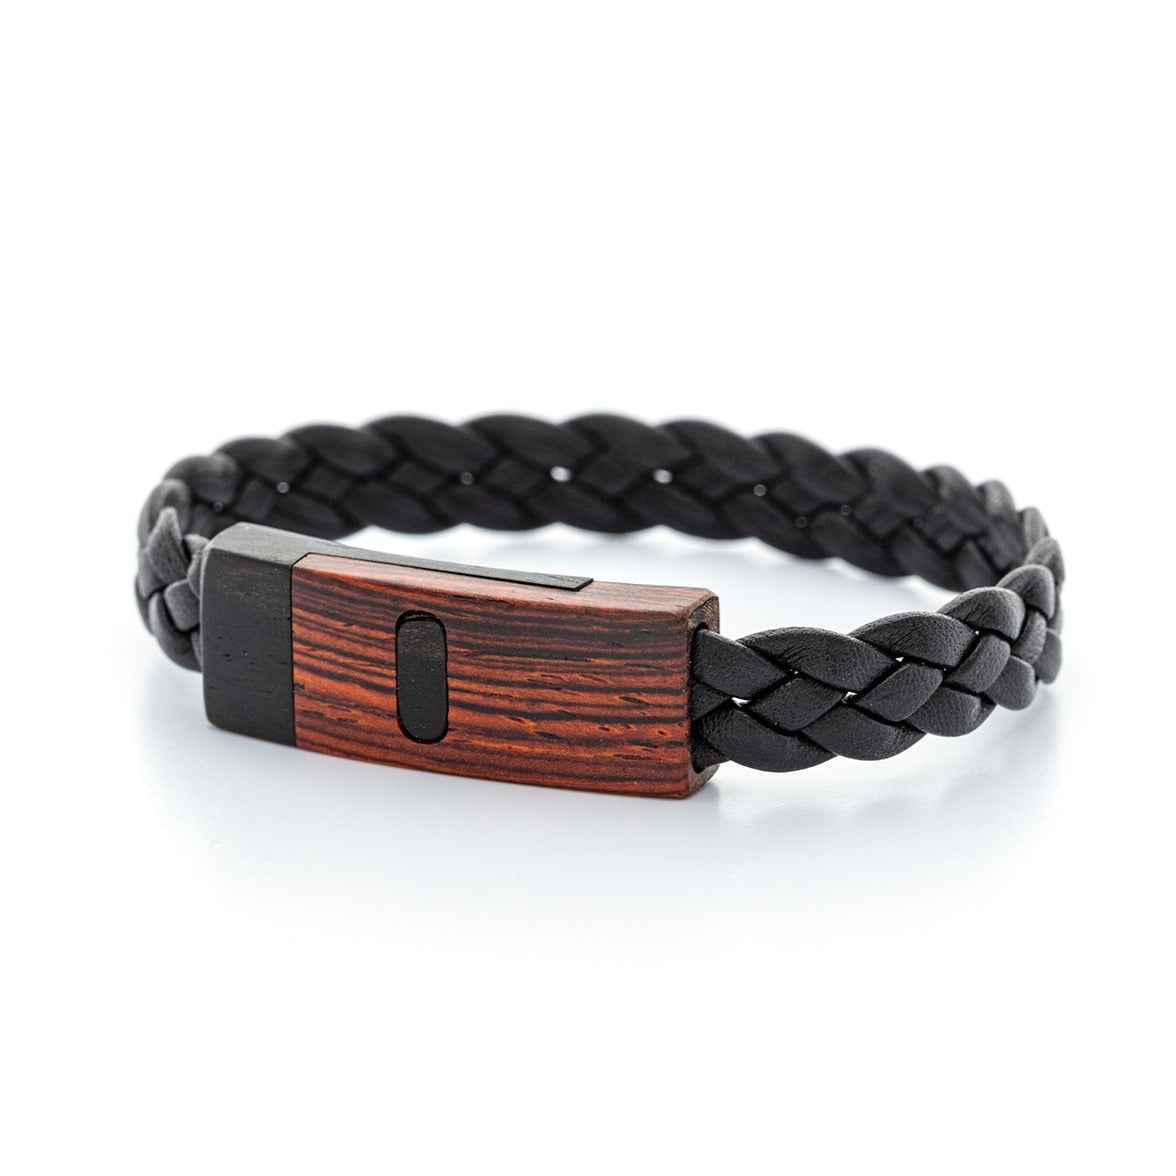 Handmade Wooden Bracelet - Wooden Clasp with Braided Leather Band by Davin & Kesler